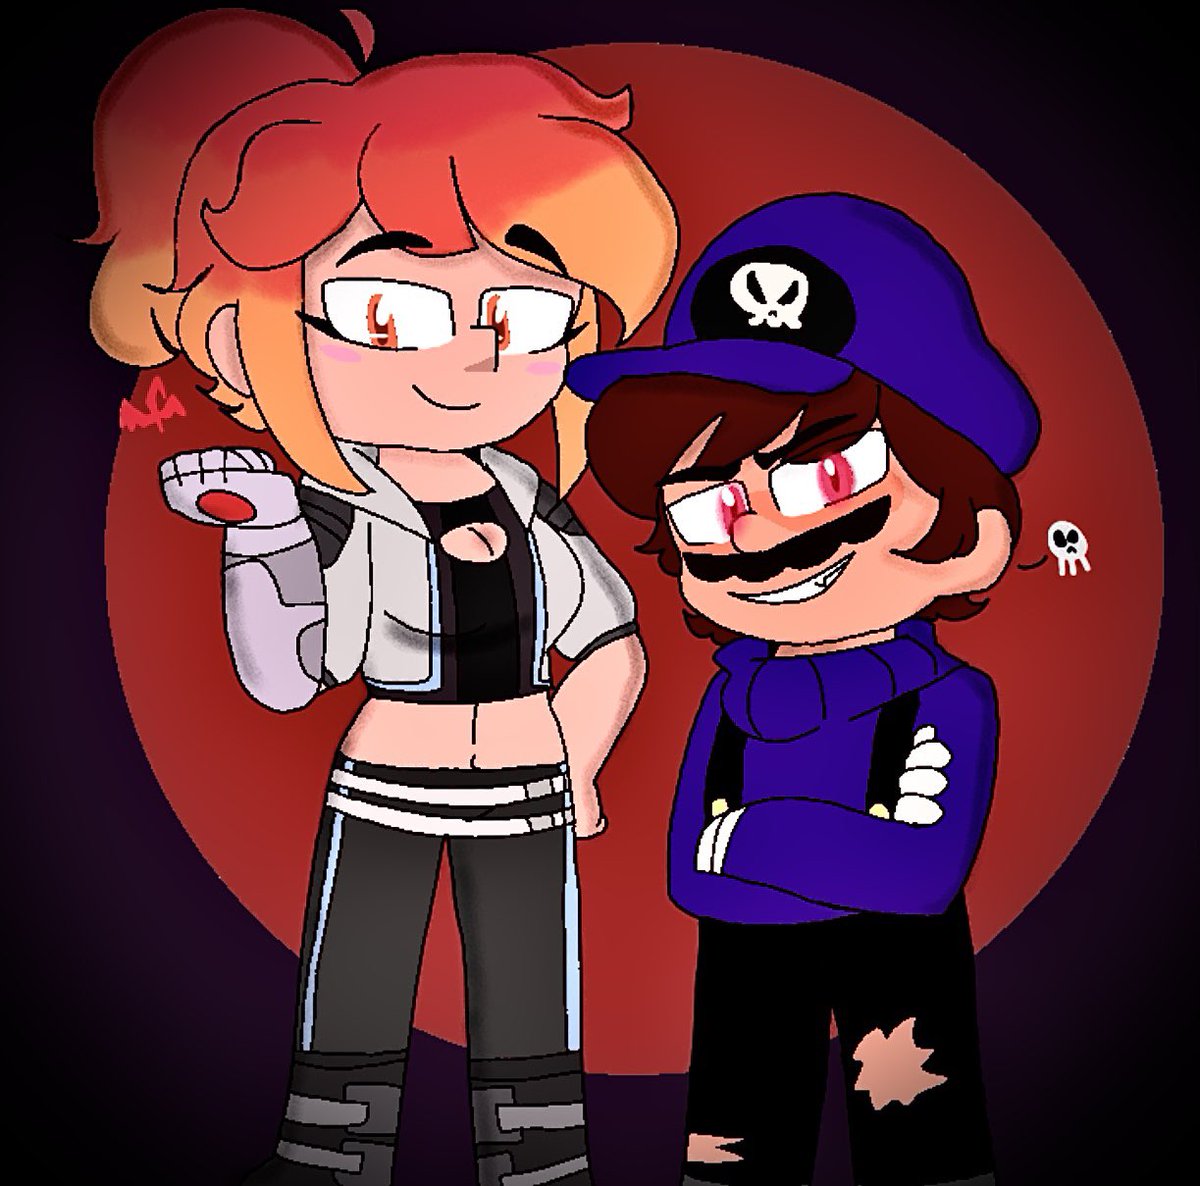 They are the mlm and wlw solidarity fr 
[#SMG4 #smg3 #smg4belle #smg4fanart]